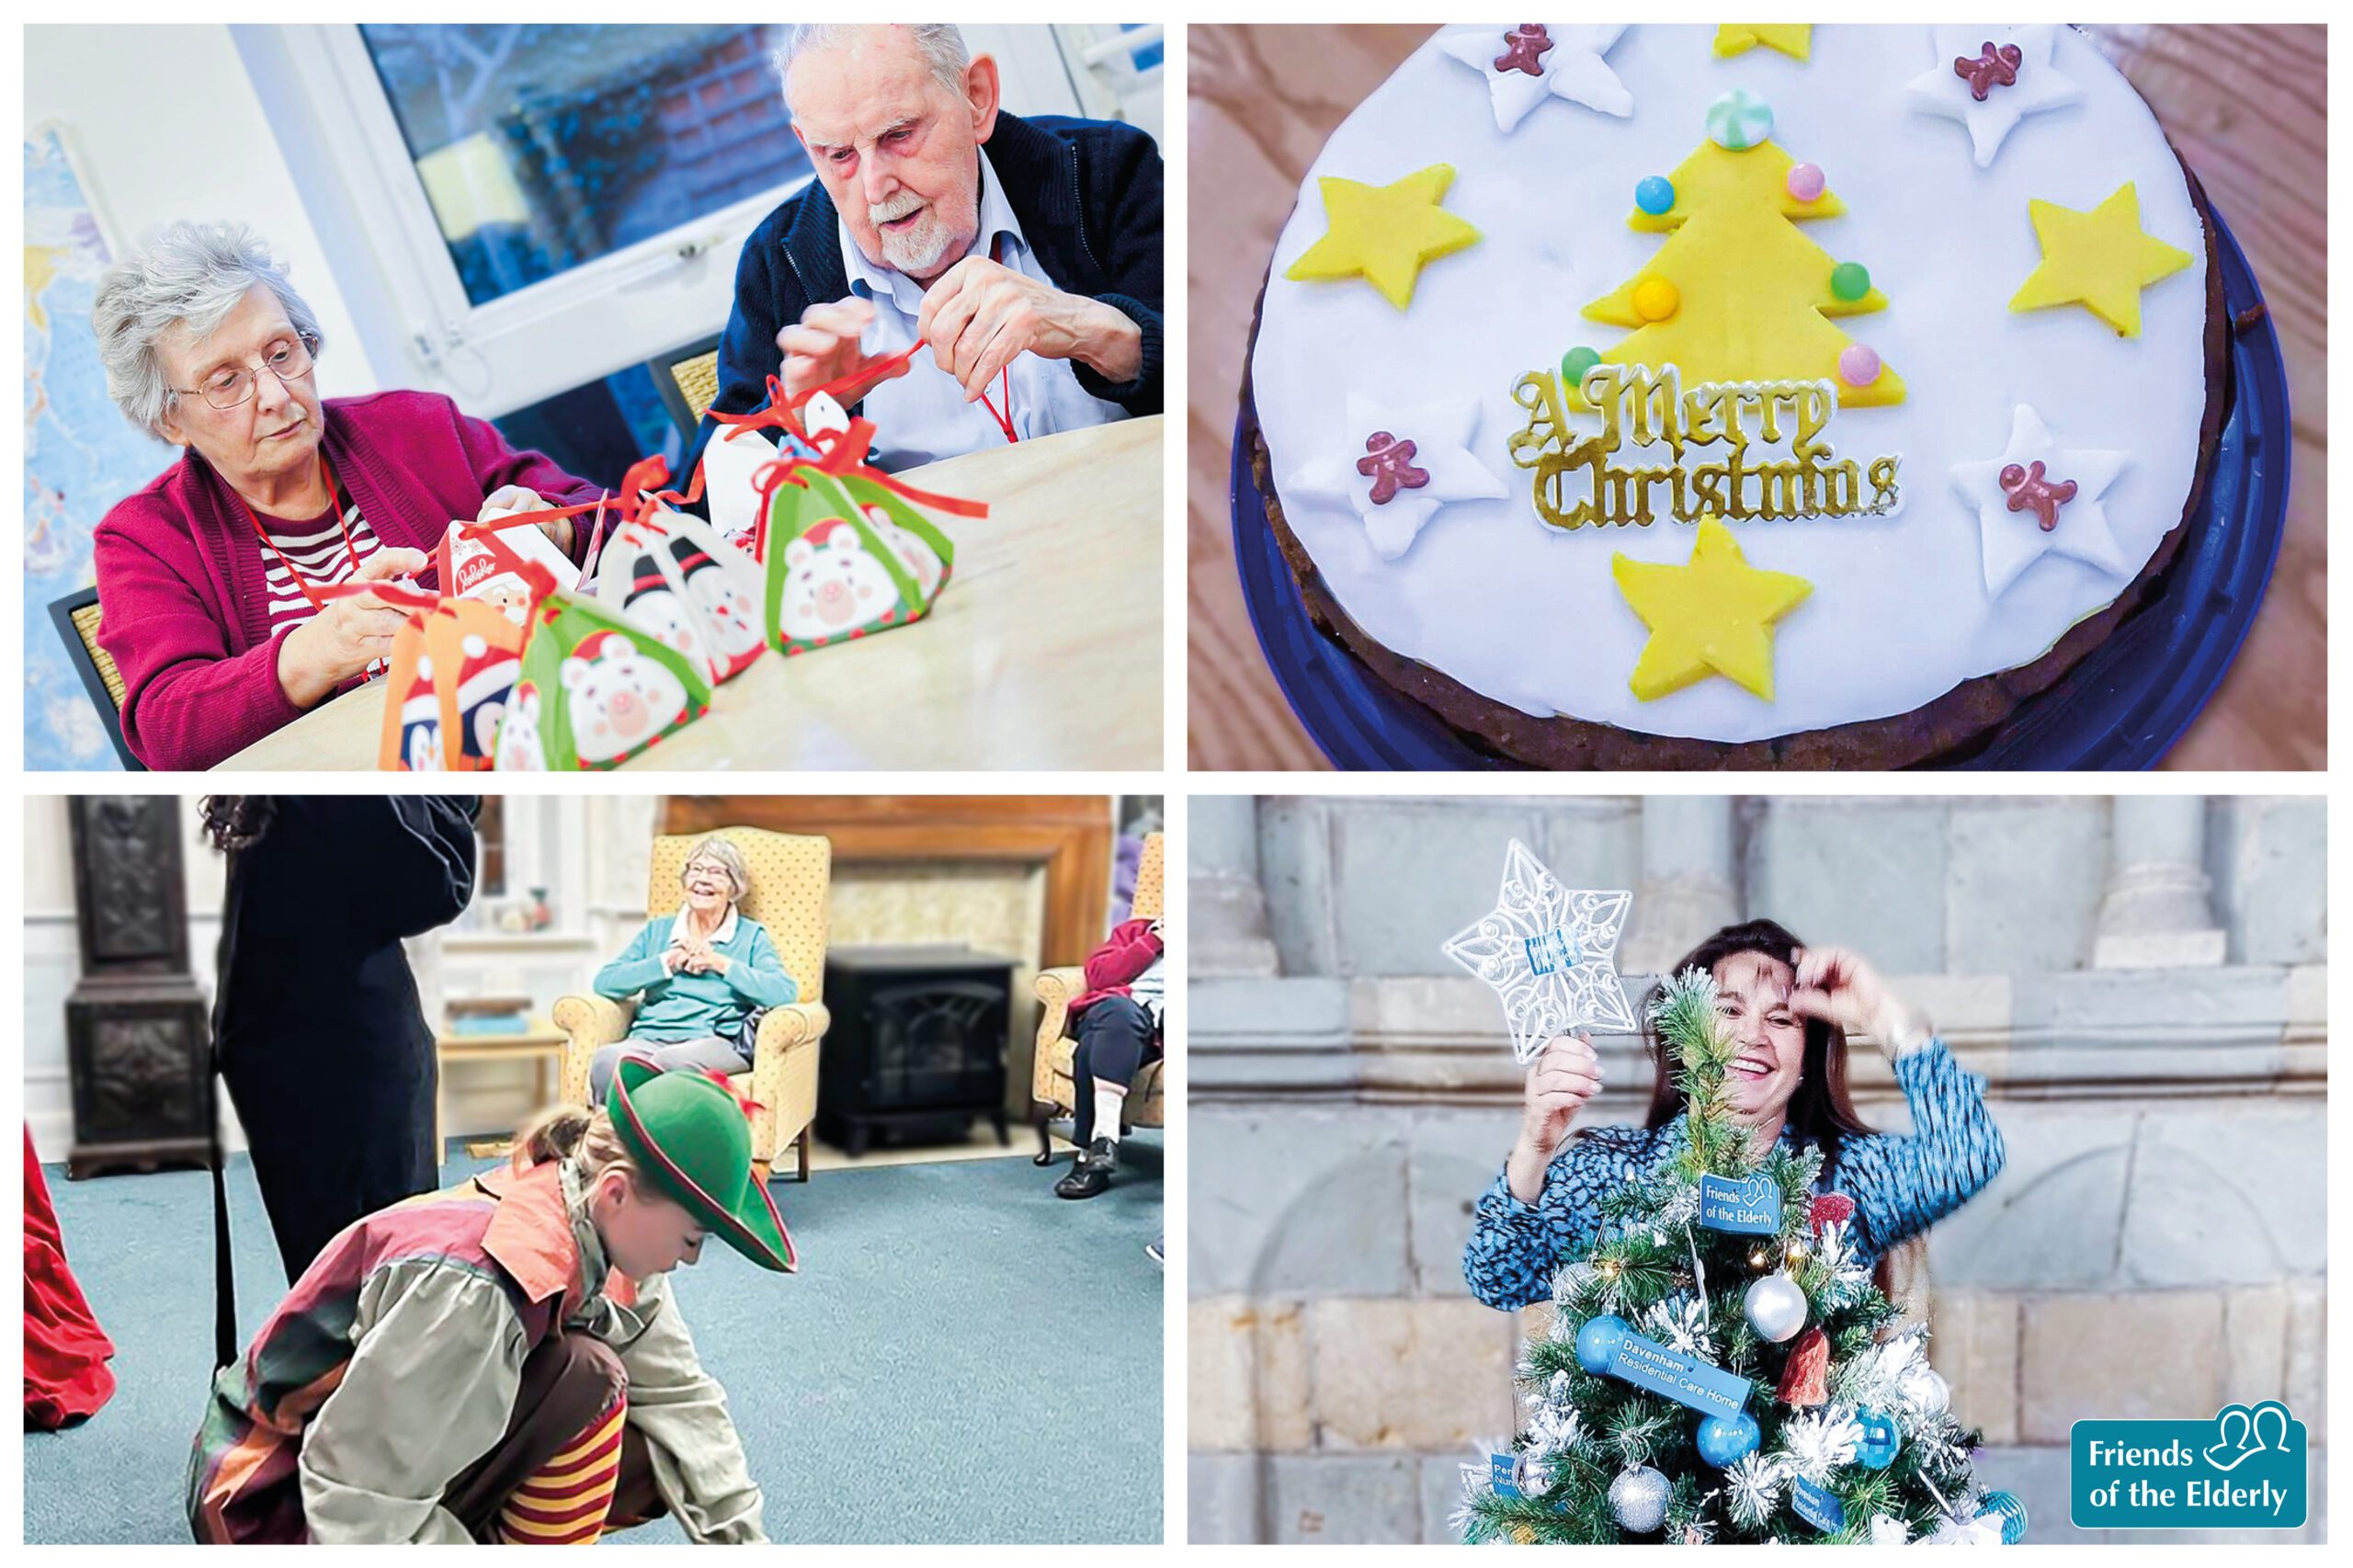 Festive photos from Christmas at our care homes and services